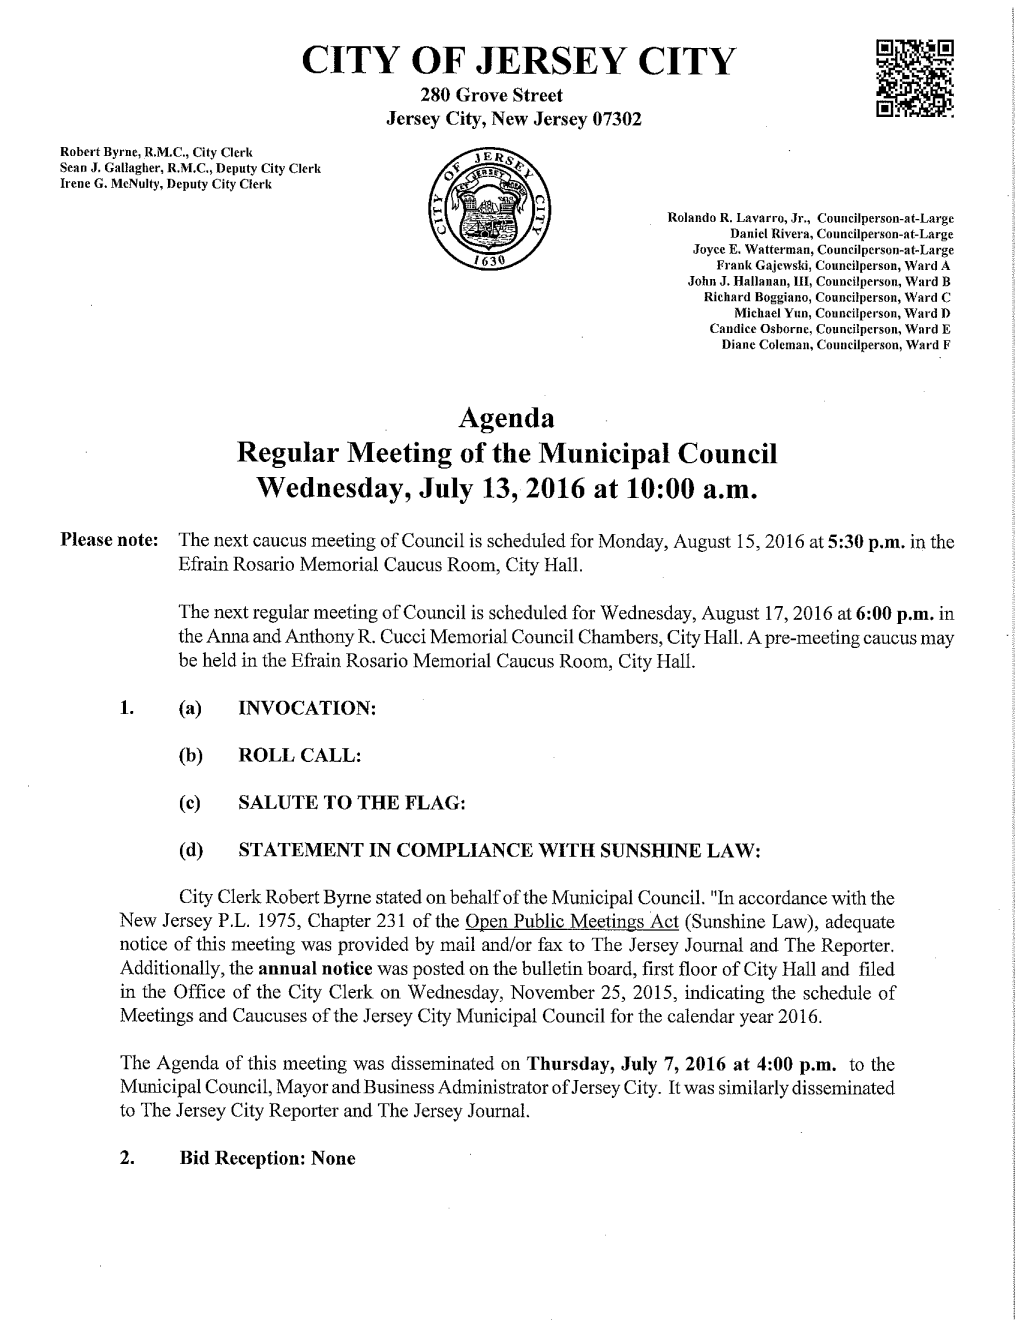 Agenda Regular Meeting of the Municipal Council Wednesday, July 13, 2016 at 10:00 A.M